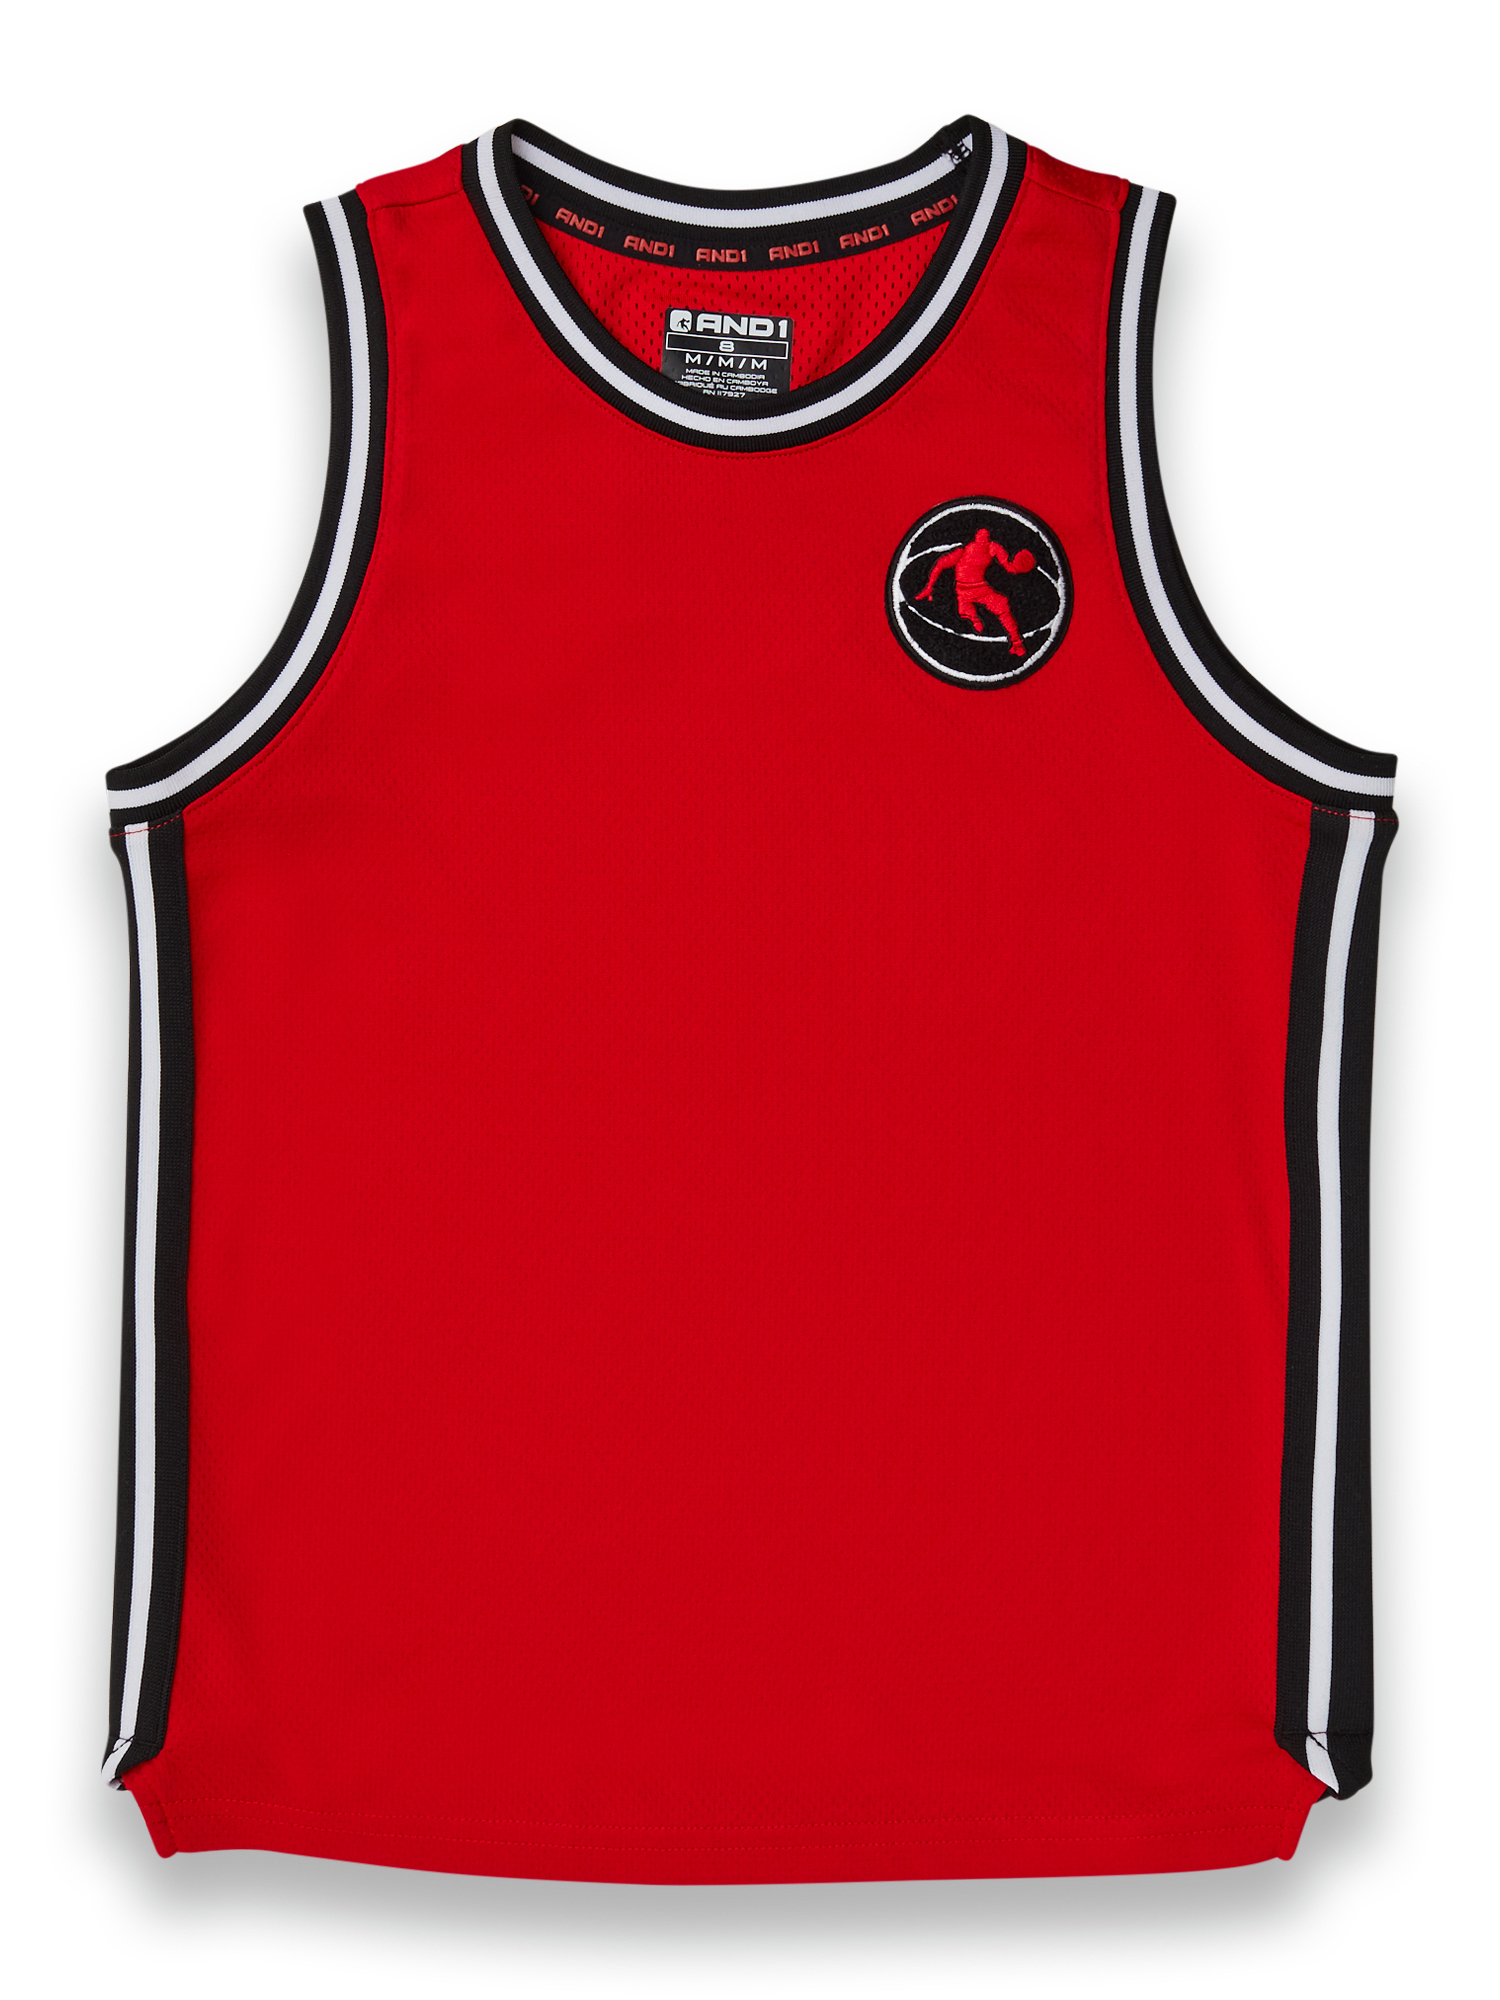 AND1 Boys Jersey Tank & Basketball Shorts 2-Piece Outfit Set, Sizes 4-18 - image 2 of 5